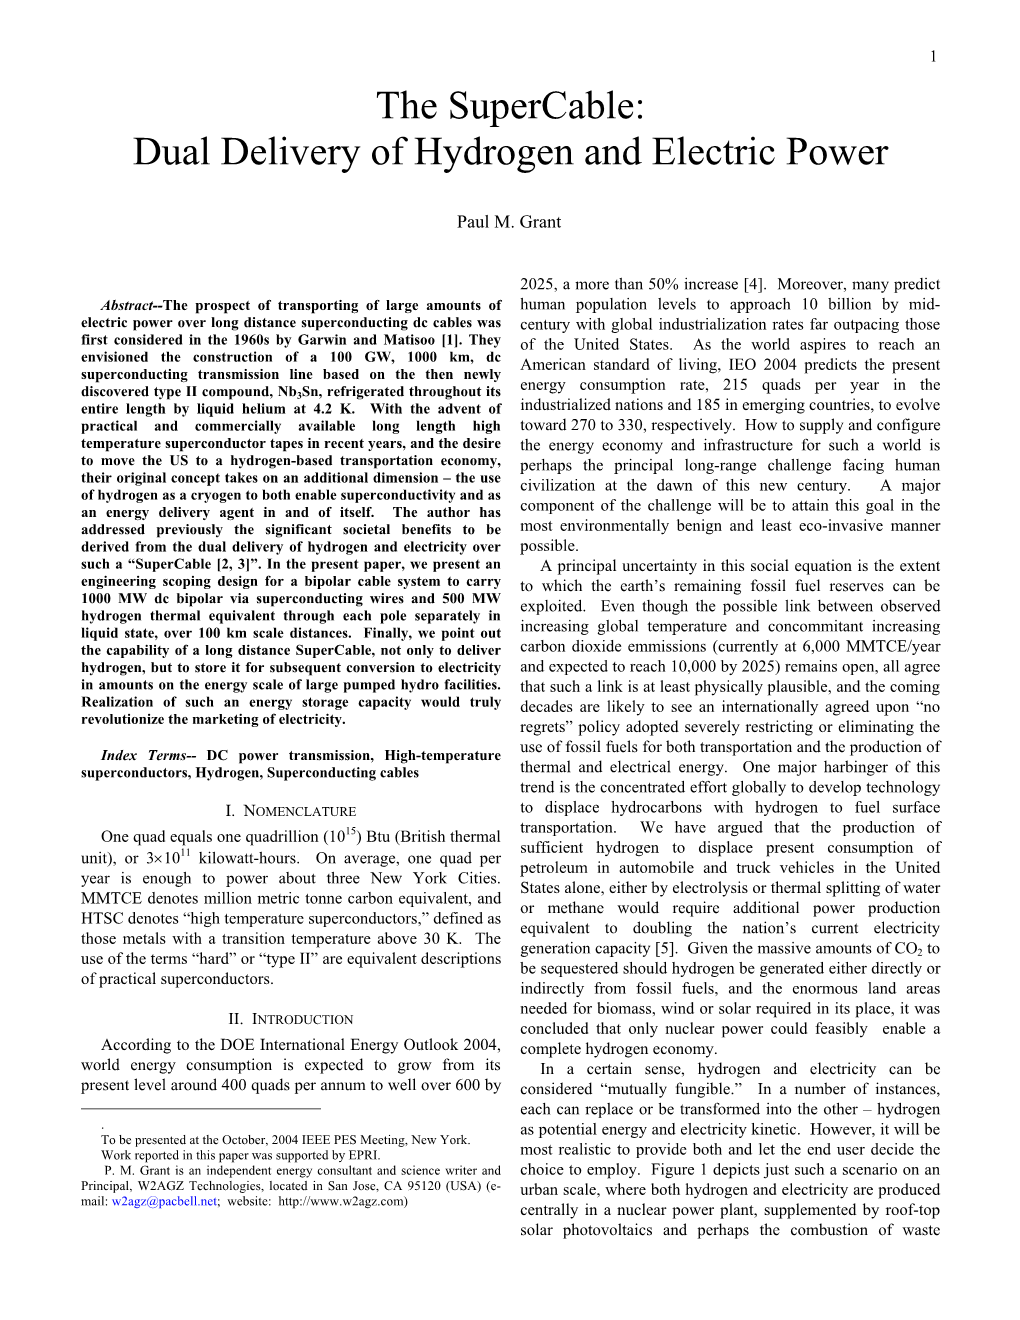 The Supercable: Dual Delivery of Hydrogen and Electric Power